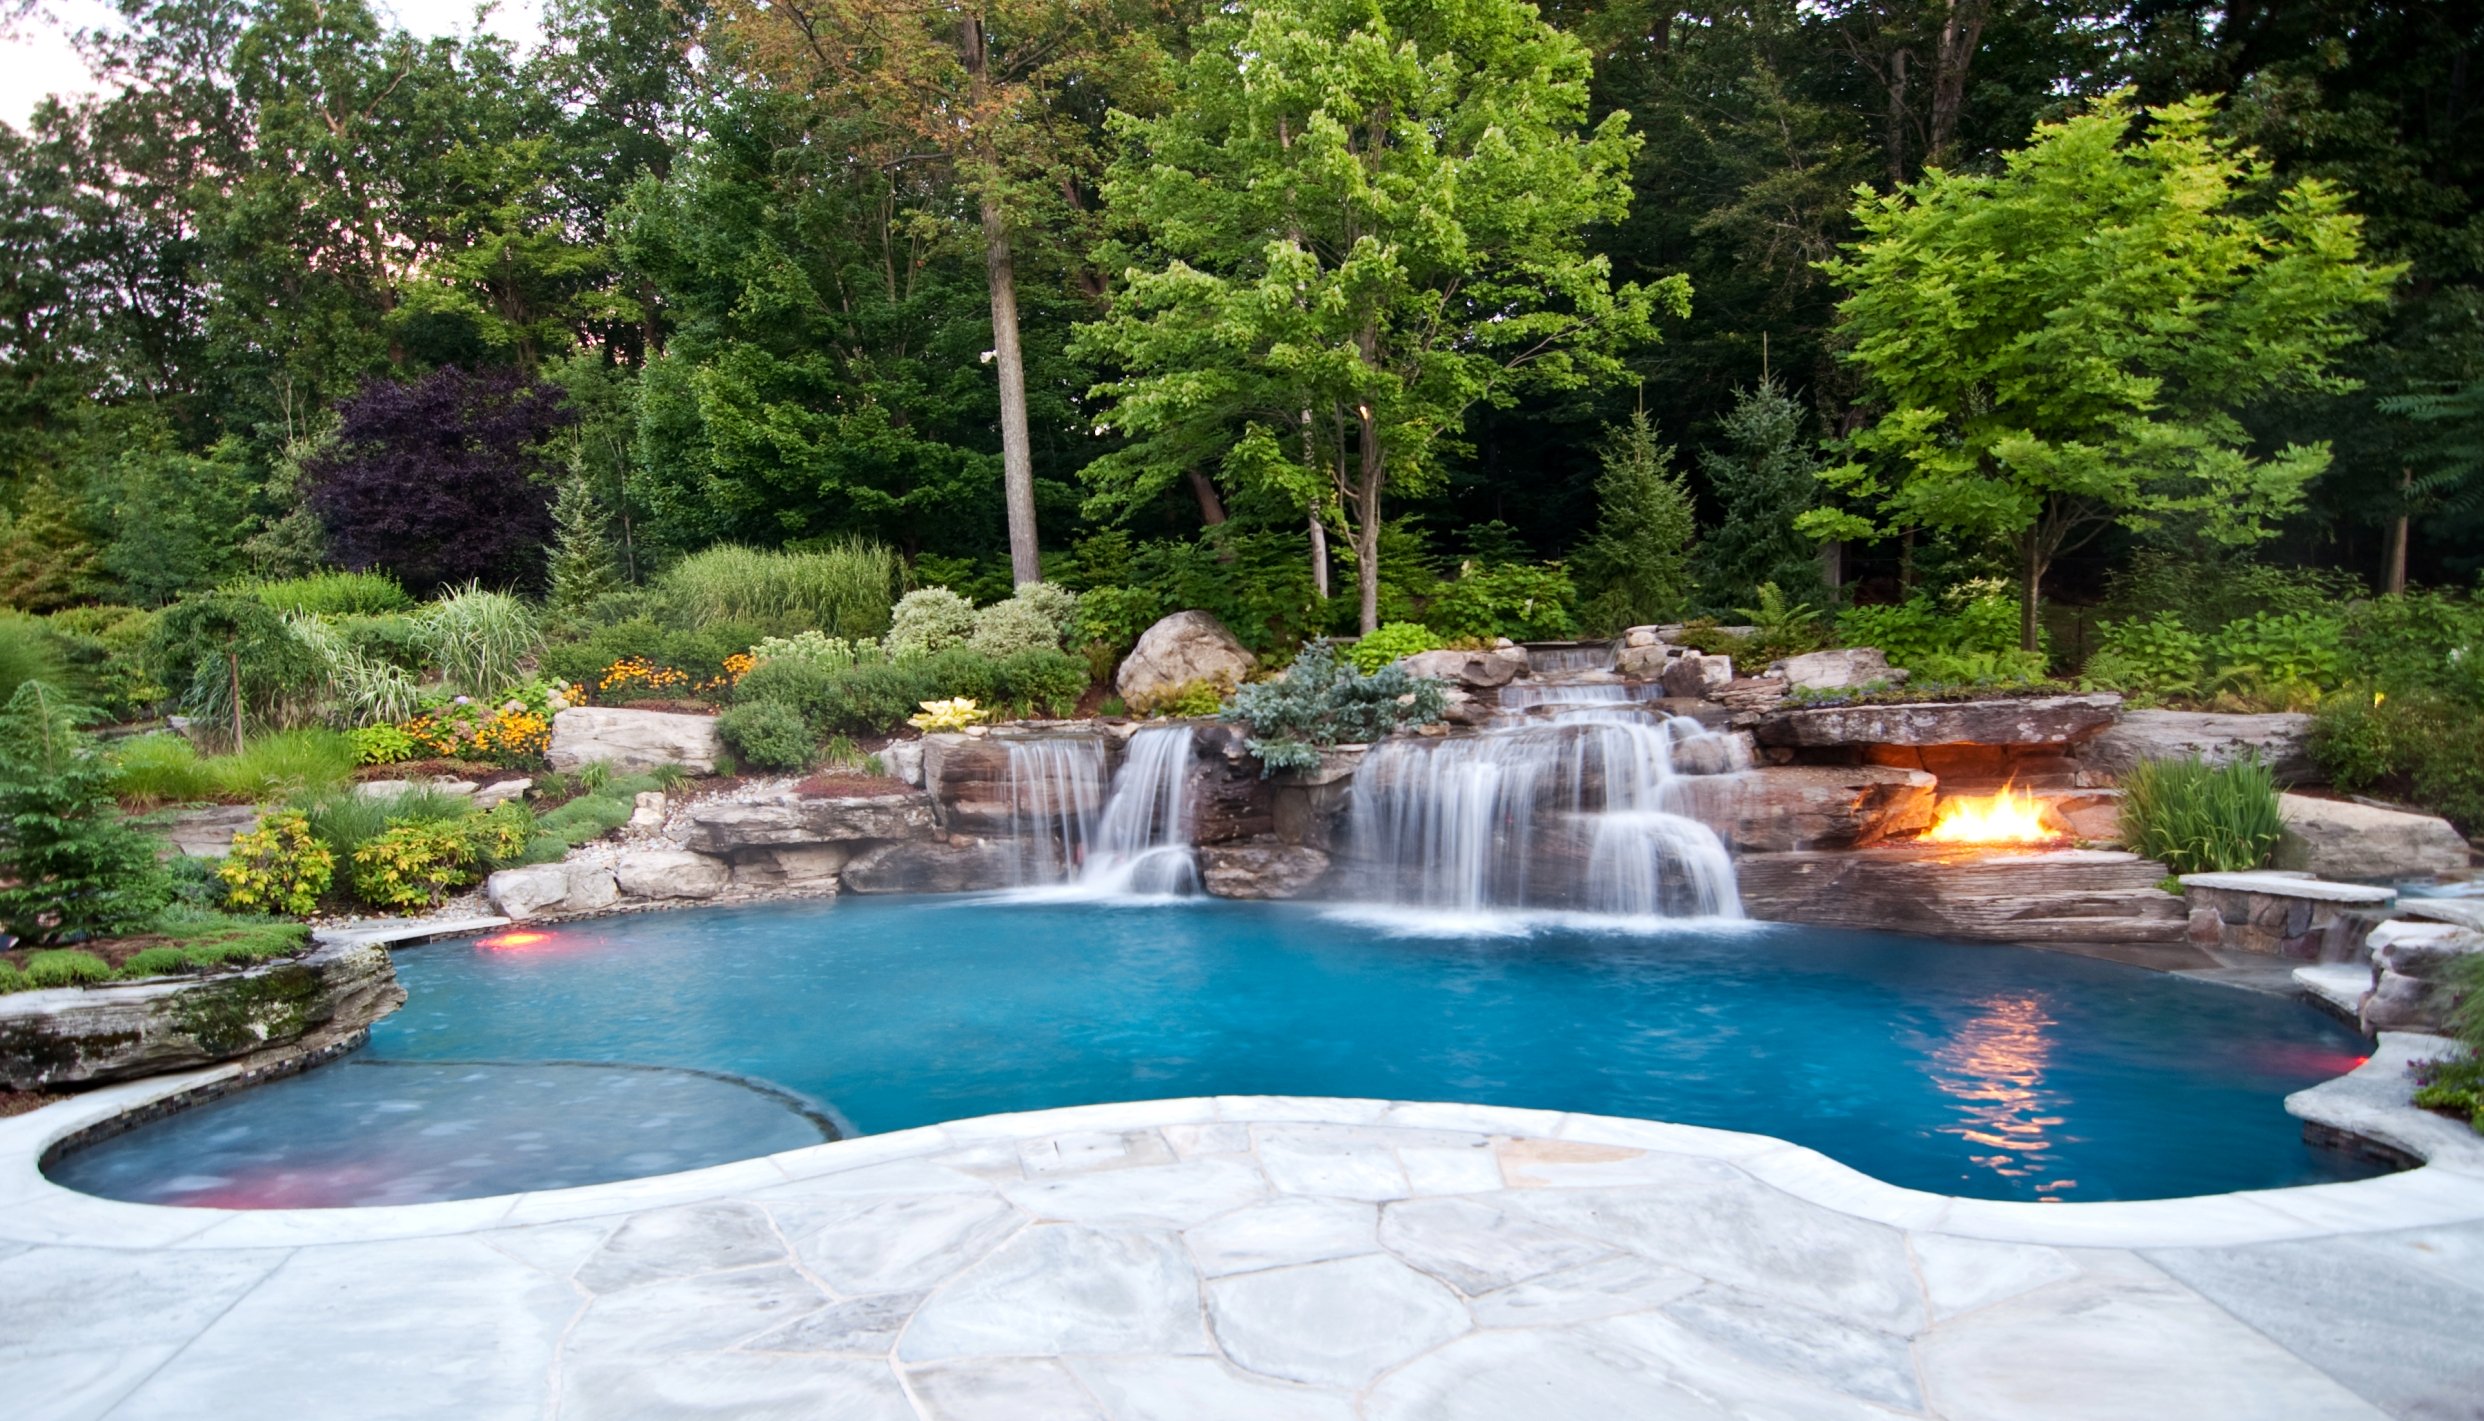 New pool construction northern virginia maryland and for Pool design garden